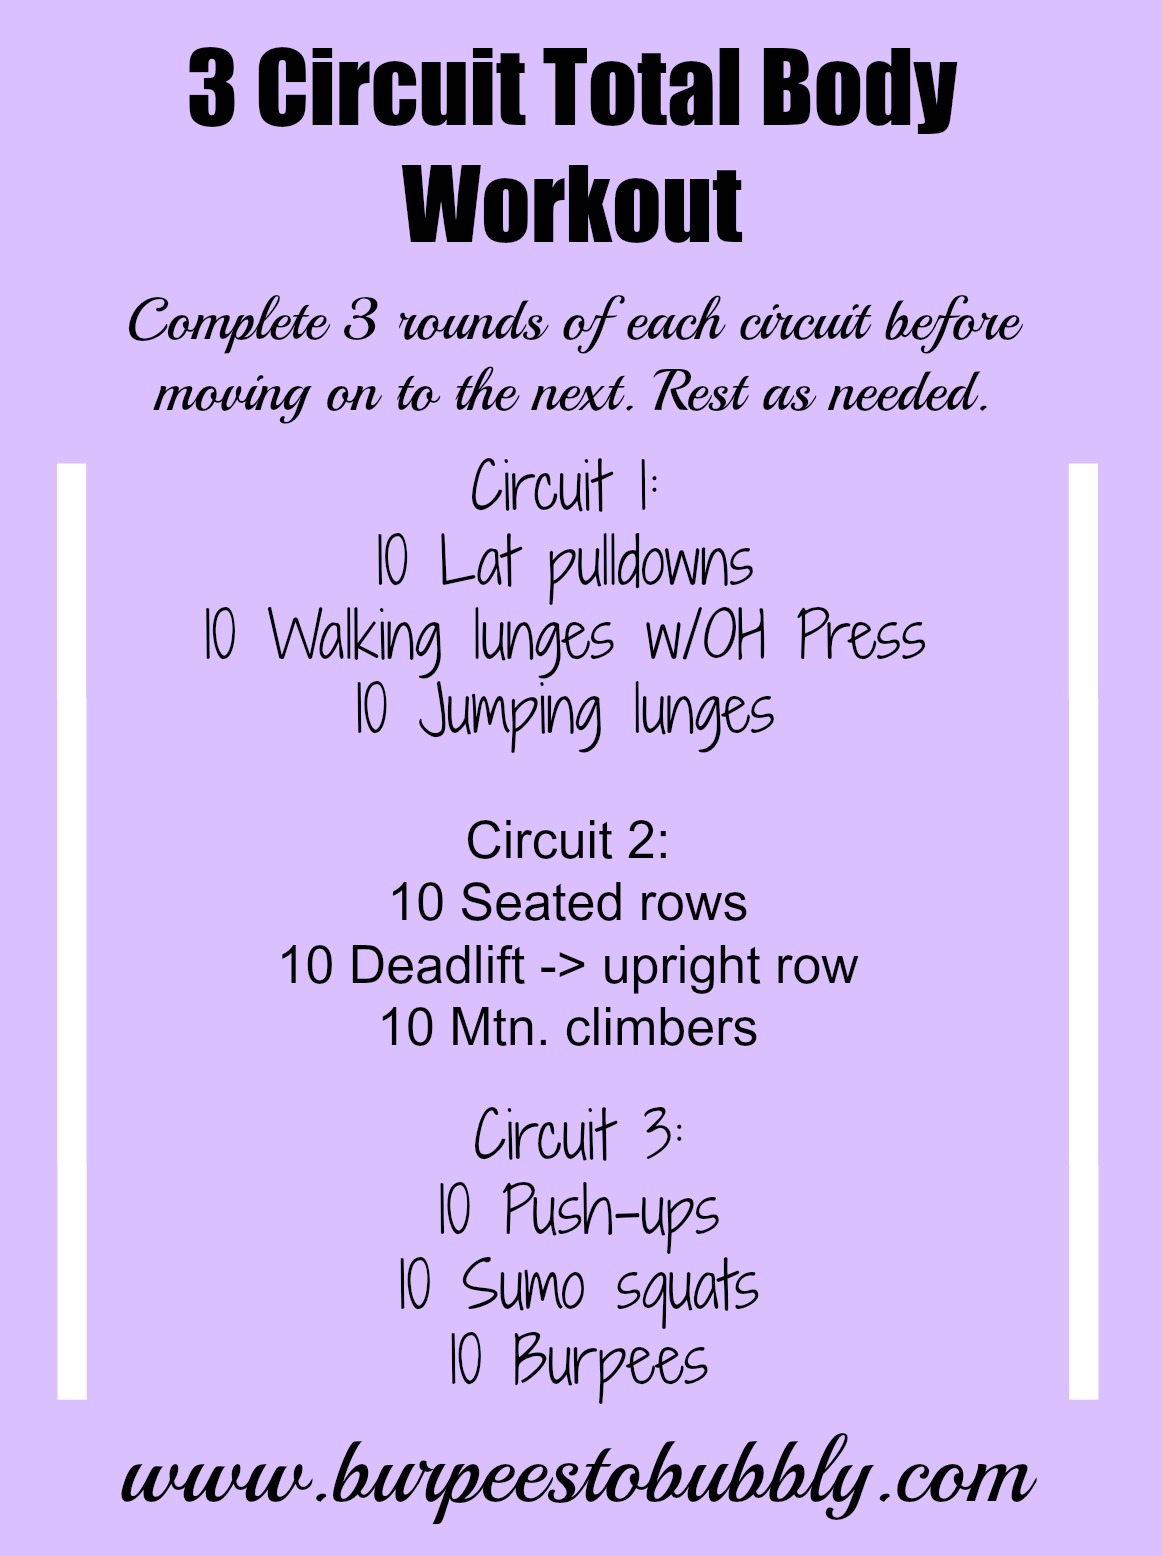 Wednesday Workout: 3 Circuit Full Body Workout – Burpees to Bubbly